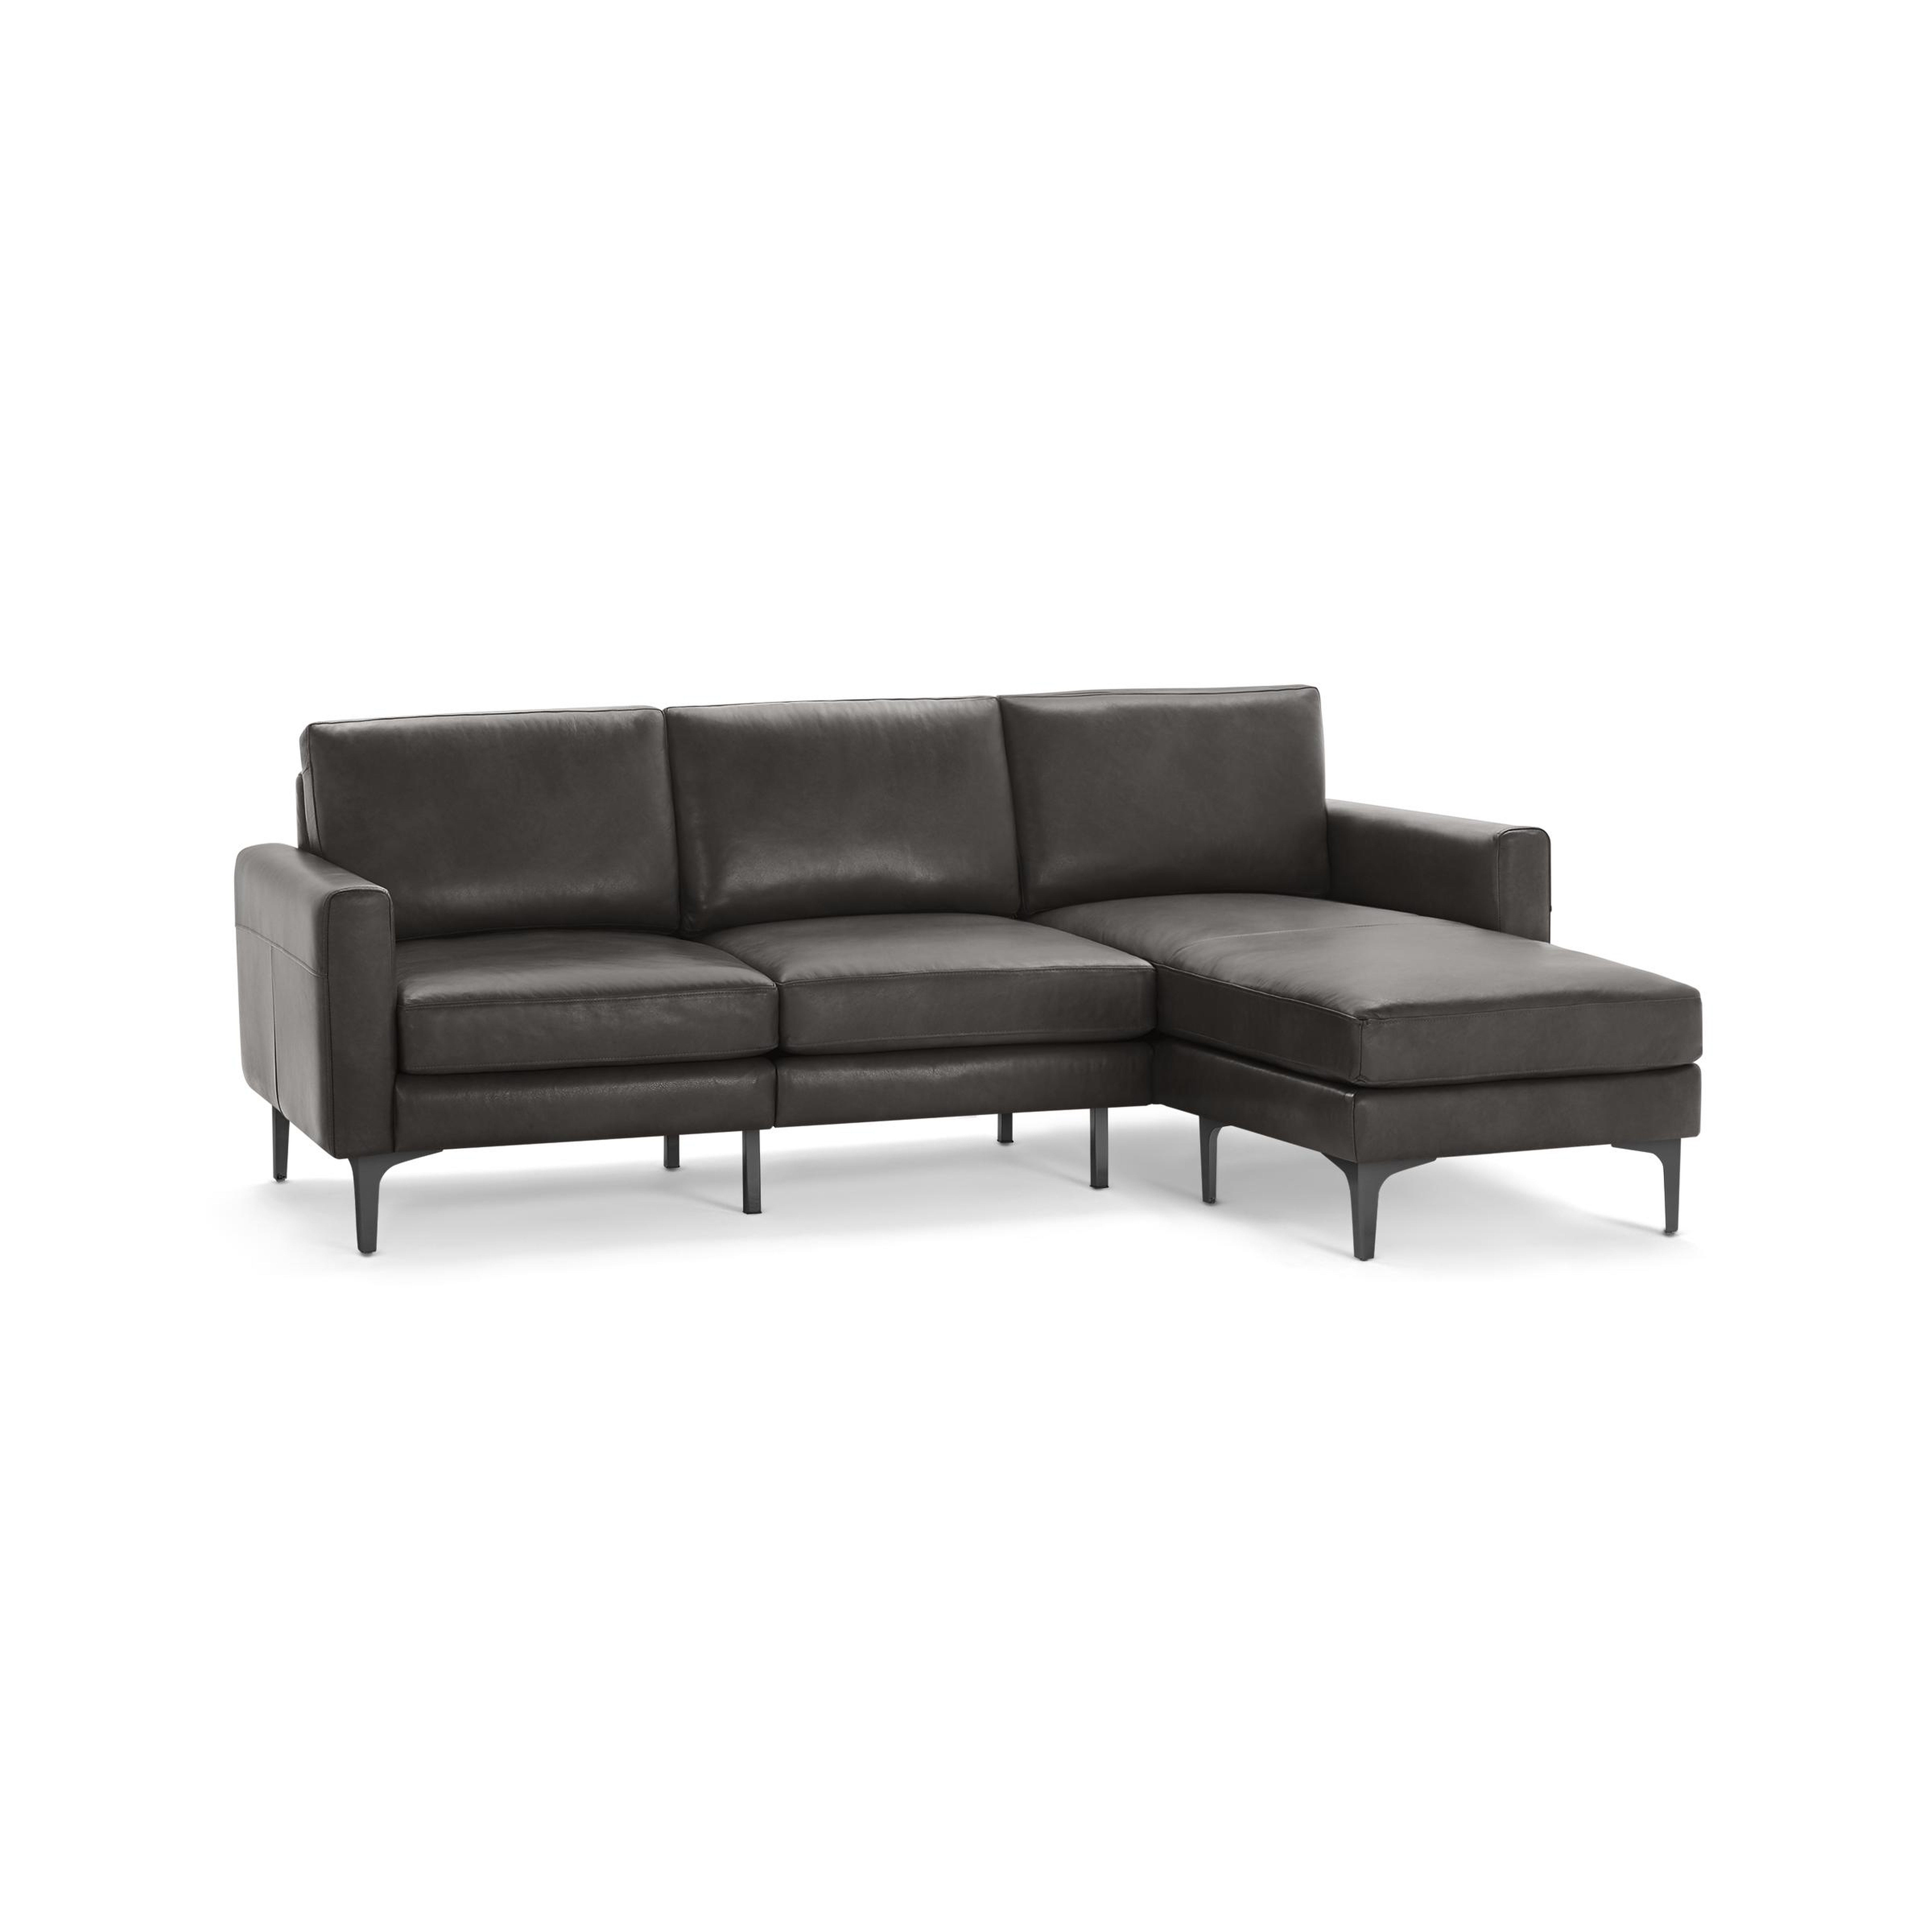 Nomad Leather Sectional in Slate, Black Metal Legs - Burrow